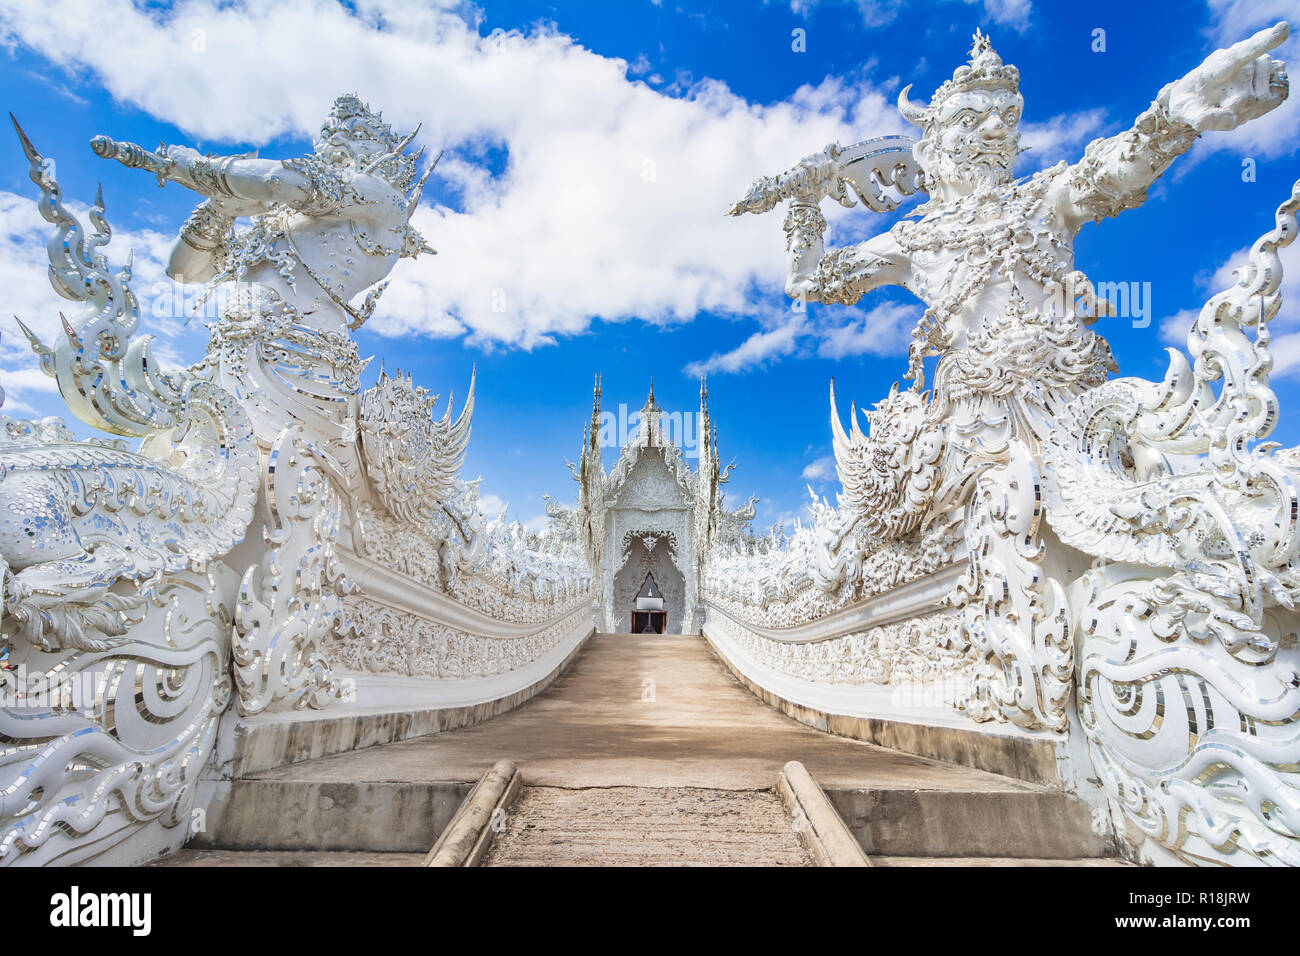 Chiang Rai, Thailand, Asia: Beautiful ornate white temple located in Chiang Rai northern Thailand, a contemporary unconventional Buddhist temple. Stock Photo